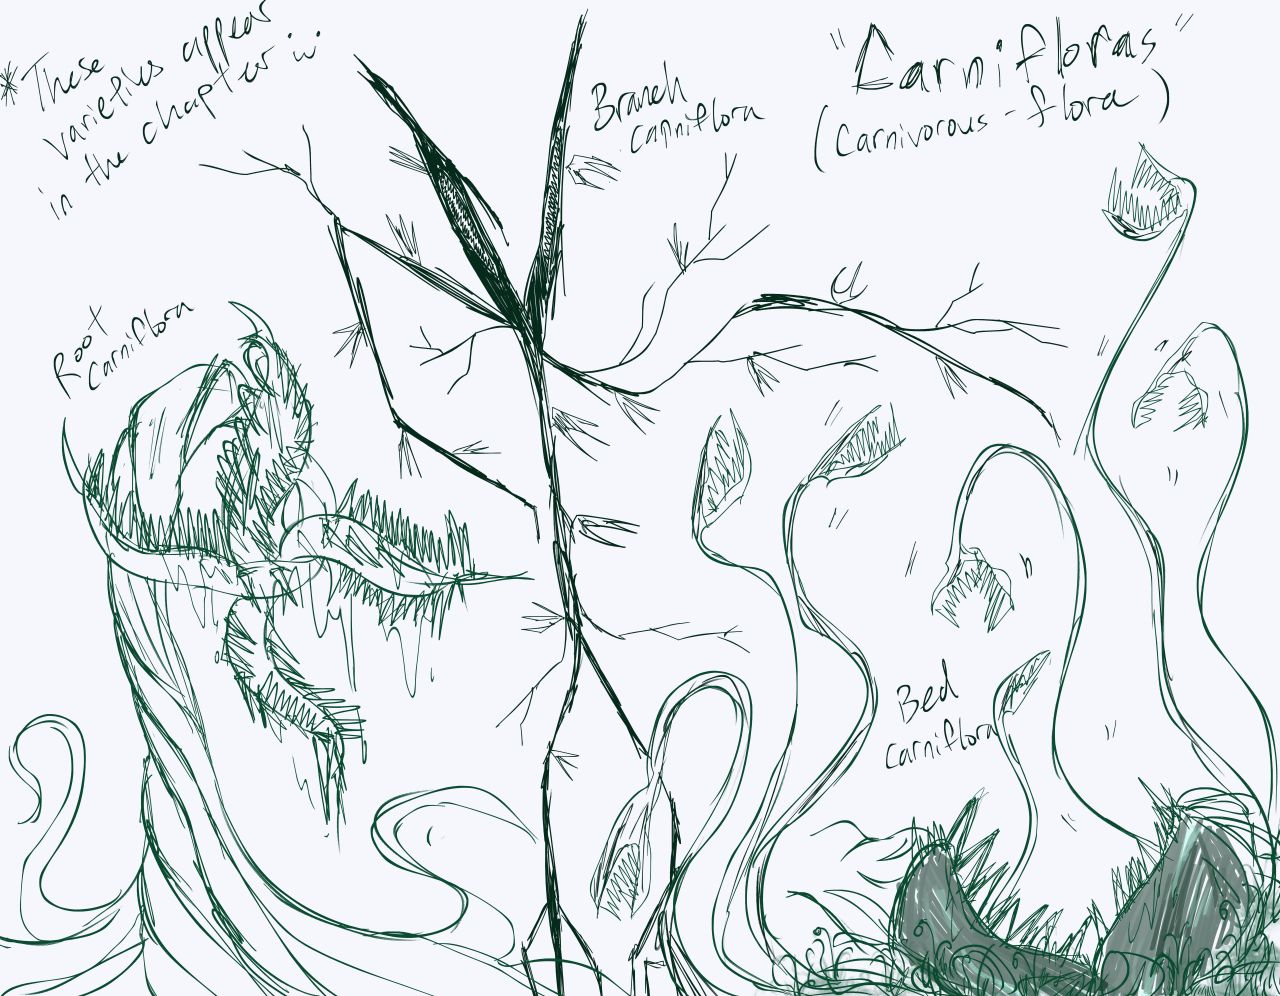 Doodles of the carniflora creatures from Chapter 8 of my RoTT rewrite fic The Eternal Day ^^ And a couple more doodles here!Yes, Nari has names for every single one of them uwu #i gotta say the bush one is probably my fav lol  #the extra doodles were just for fun  #not sure if those varieties will appear in my fic yet  #well actually the tree one for sure  #whompin willows hehehe #toa nari #nari of the eternal forest #toa wizards #the eternal day : tales of arcadia  #tales of arcadia  #trollhunters rise of the titans #trollhunters rott #rise of the titans #rott rewrite #rika tries to draw